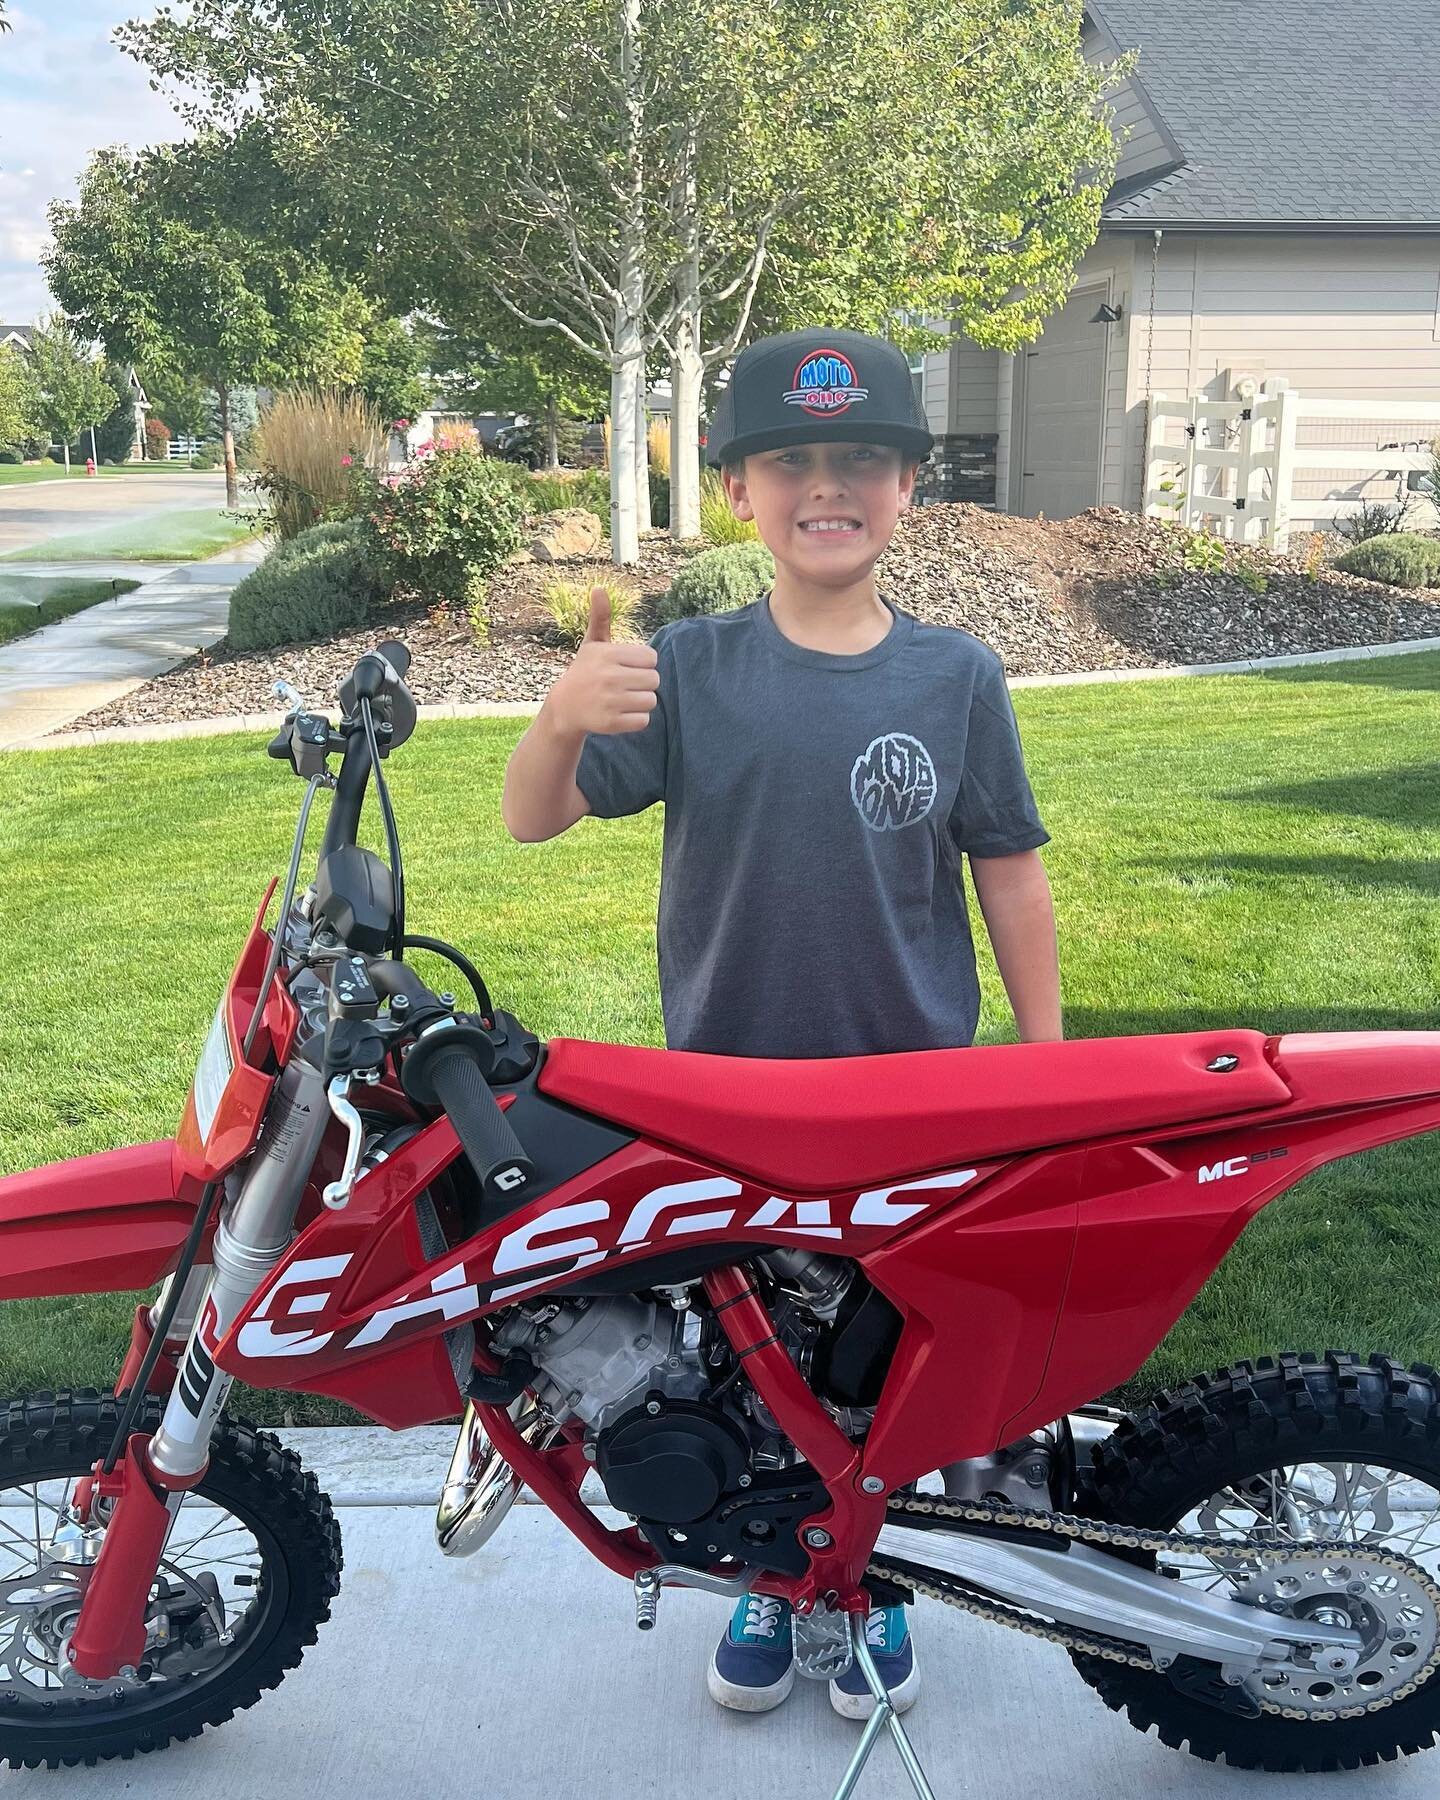 We got @dillonlager151 hooked up with a new red machine! Thanks again to the Lager family. #motoonektm